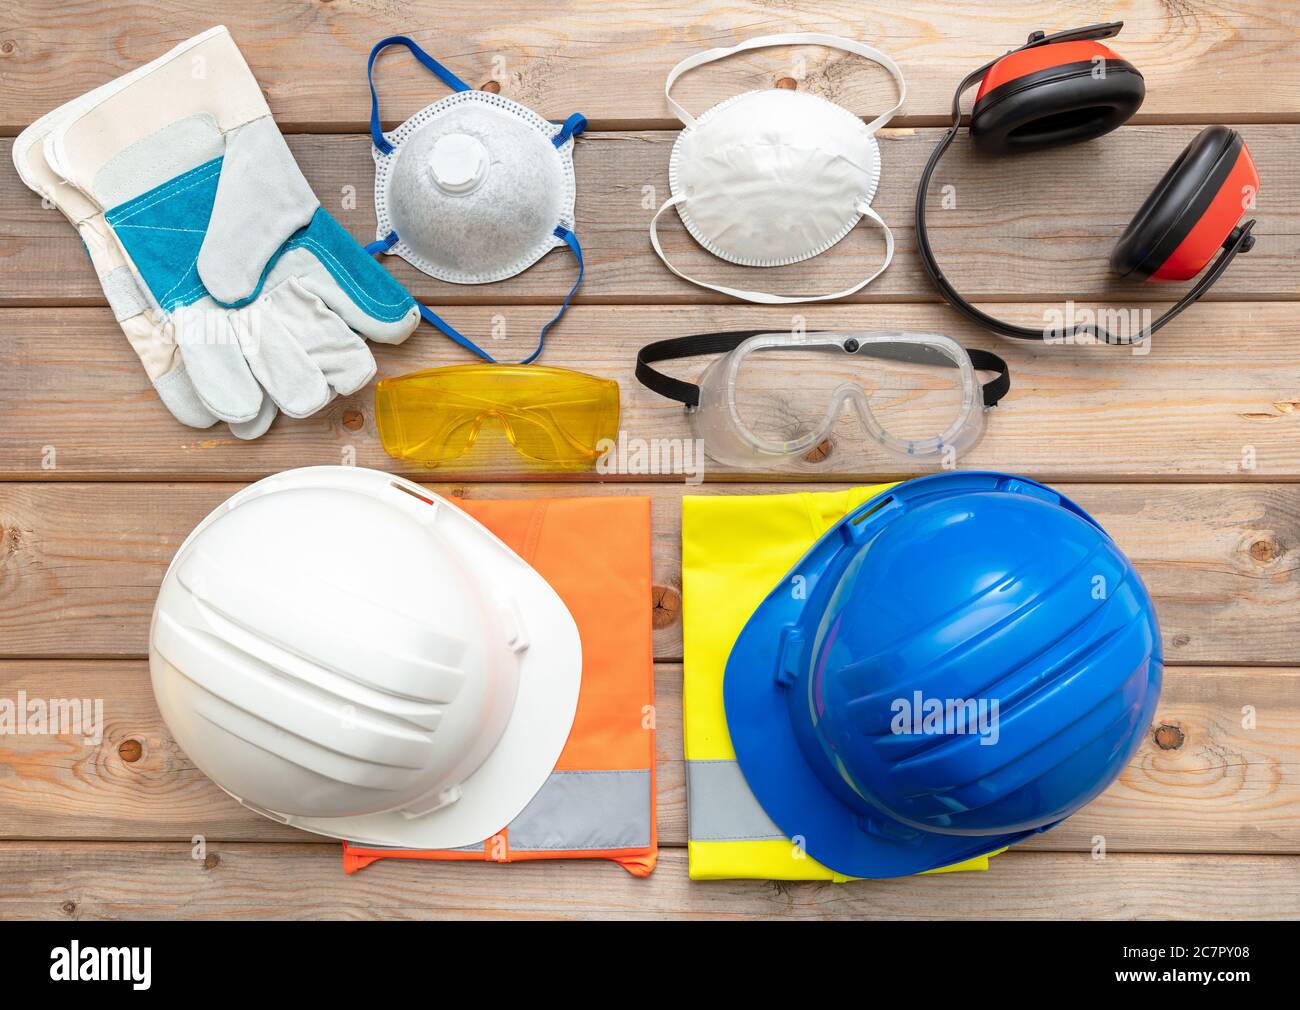 Work safety protection equipment. Industrial protective gear for two on wooden background. Construction site health and safety concept Stock Photo